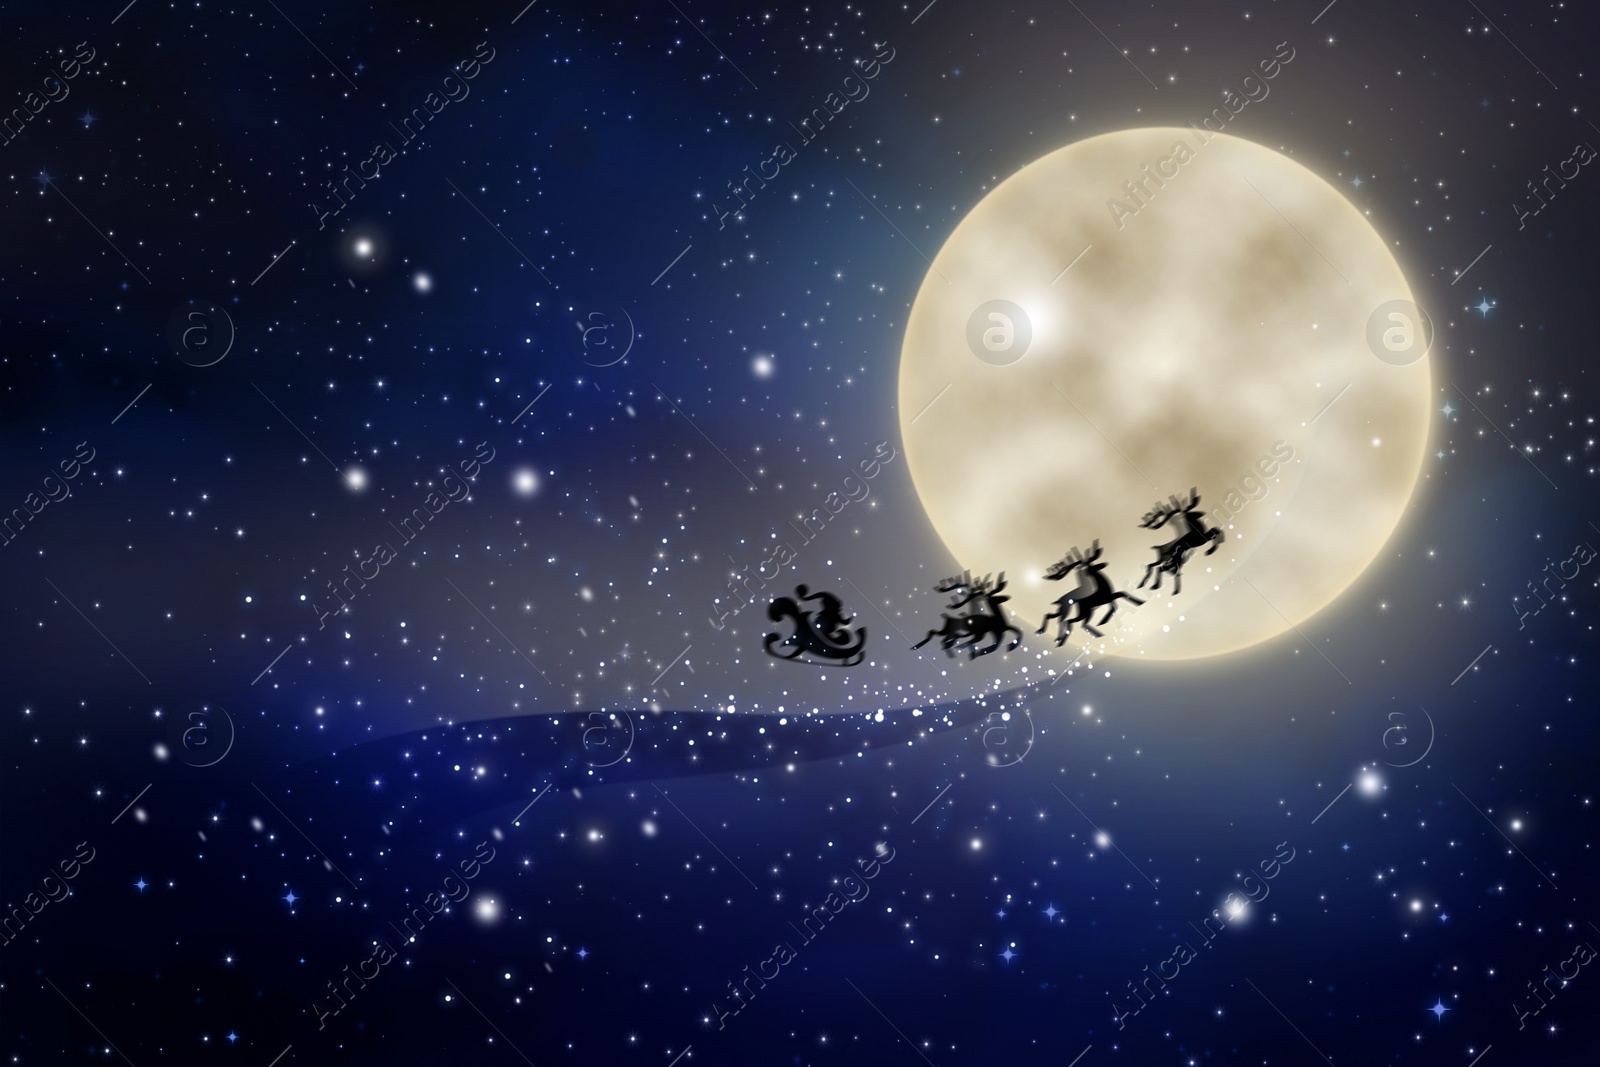 Illustration of Magic Christmas eve. Santa with reindeers flying in sky on full moon night